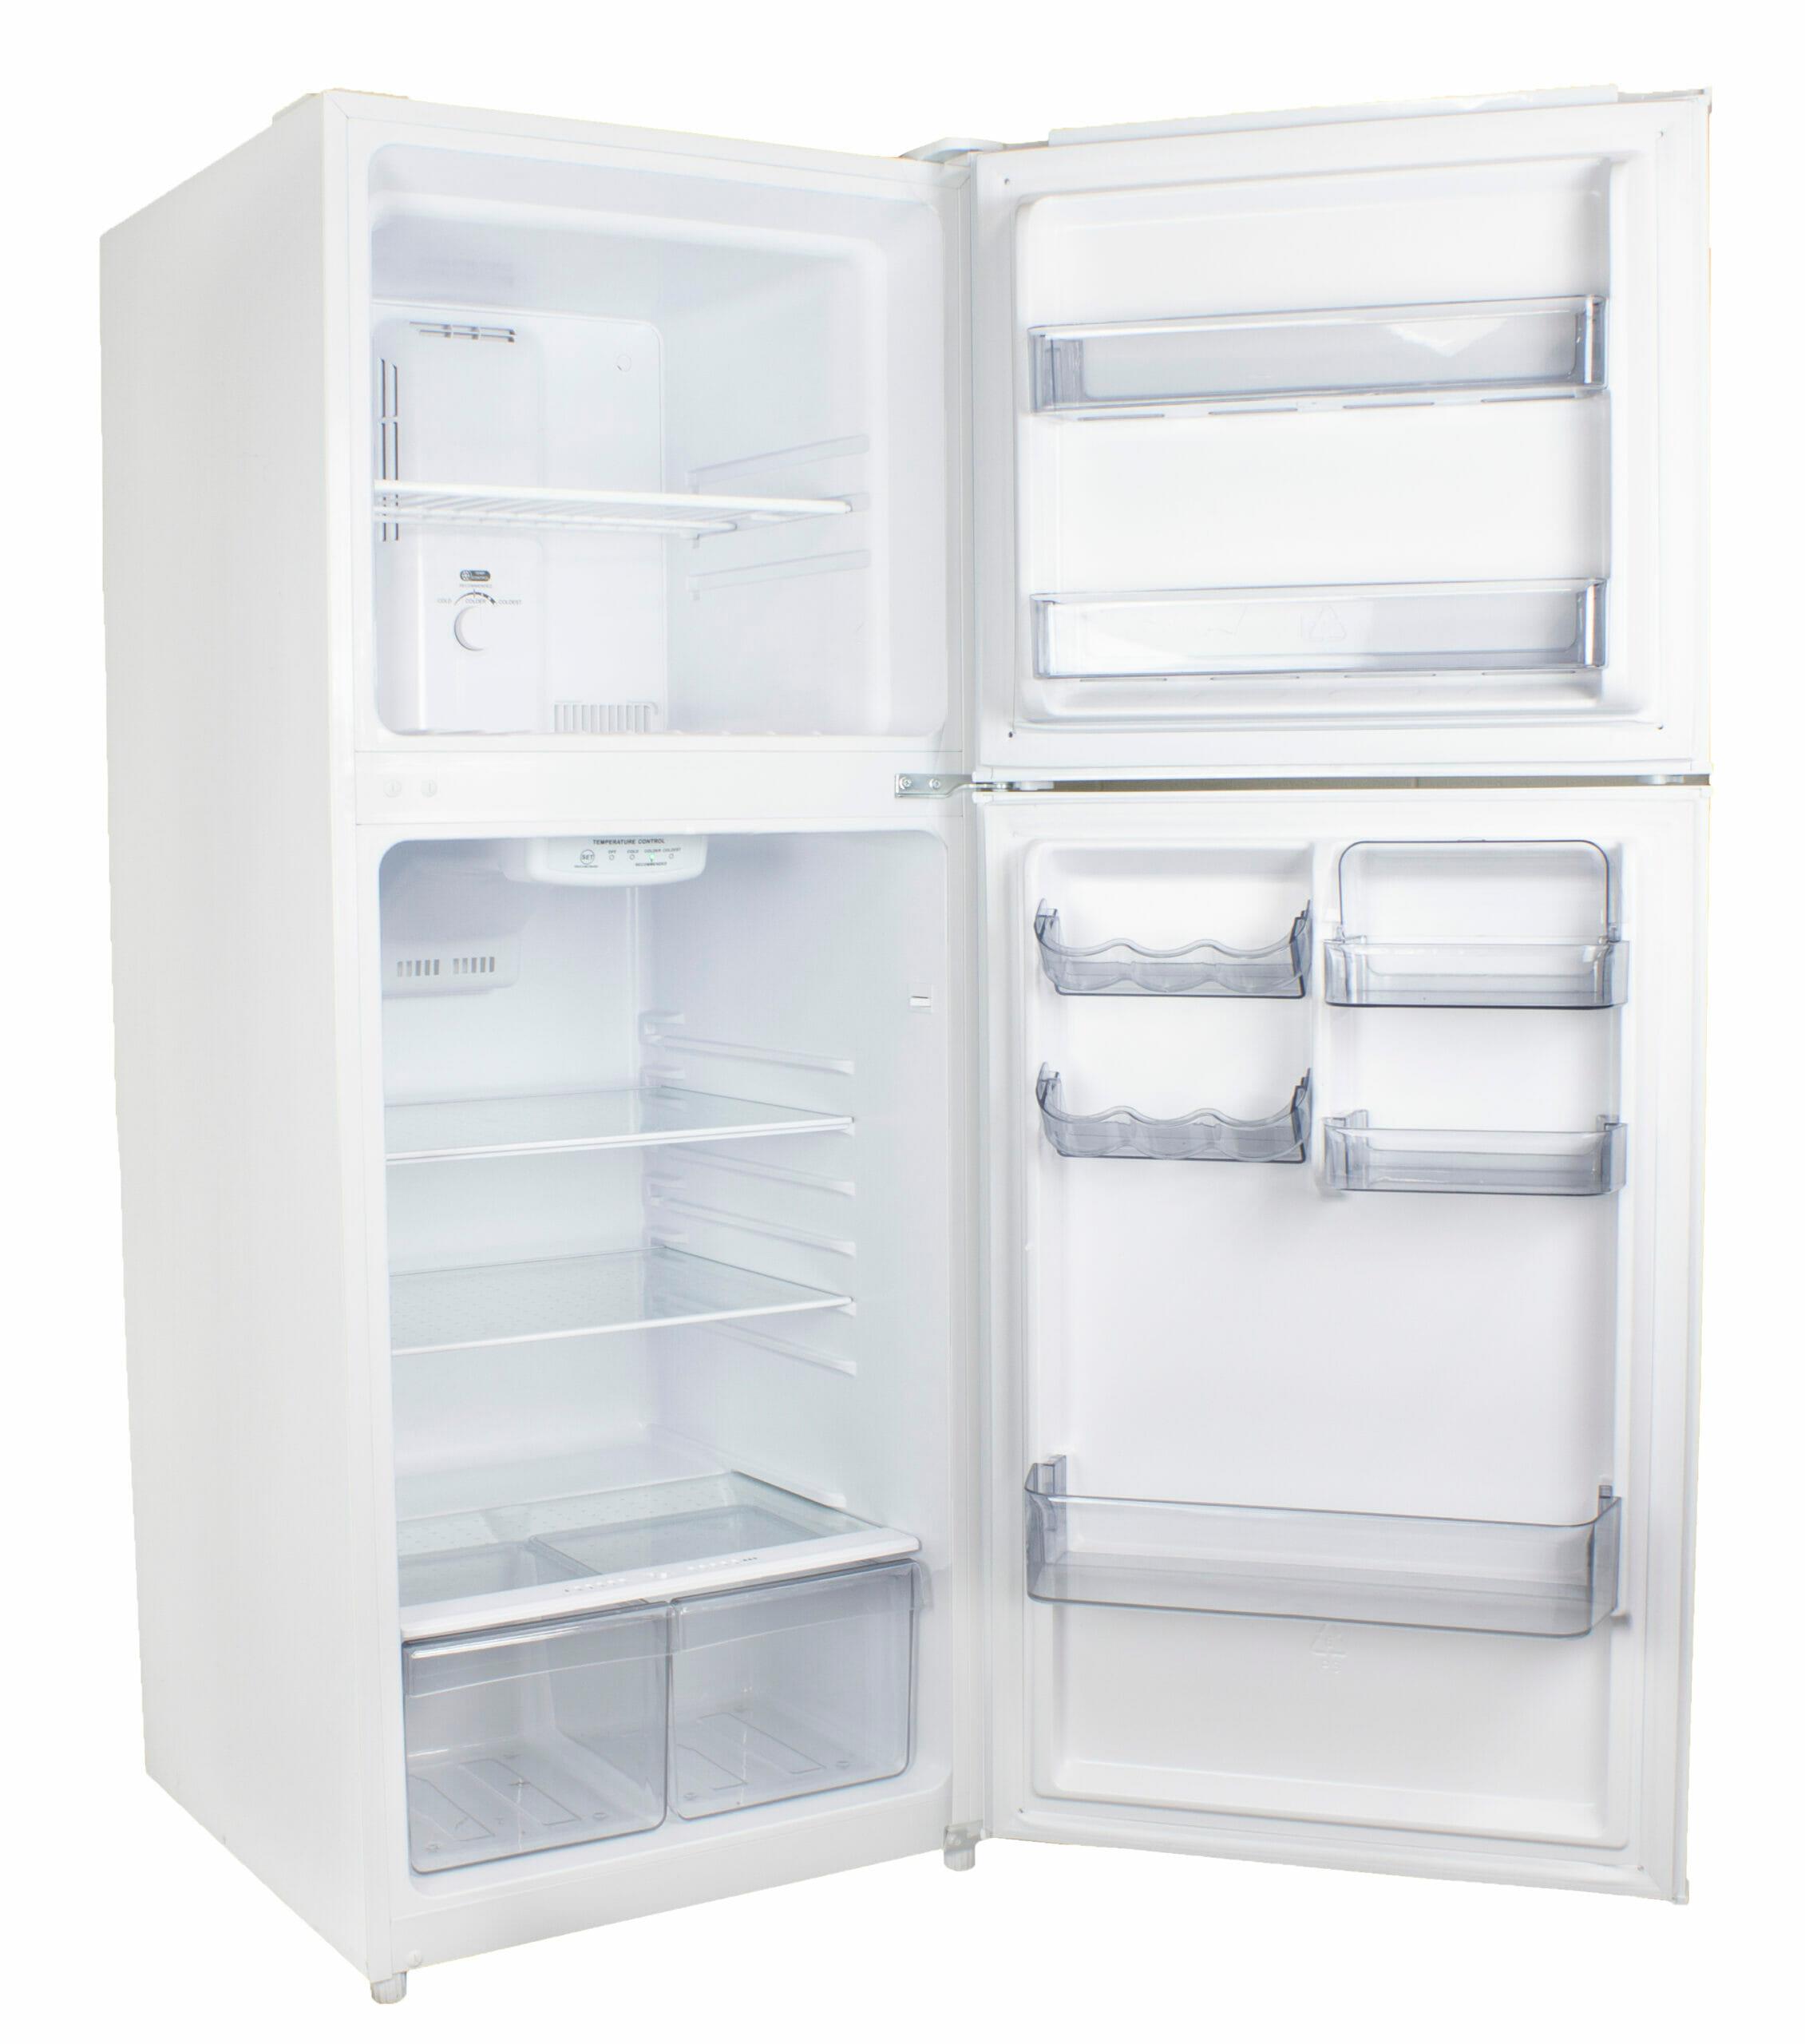 Danby 10.1 cu. ft. Top Mount Apartment Size Fridge in White